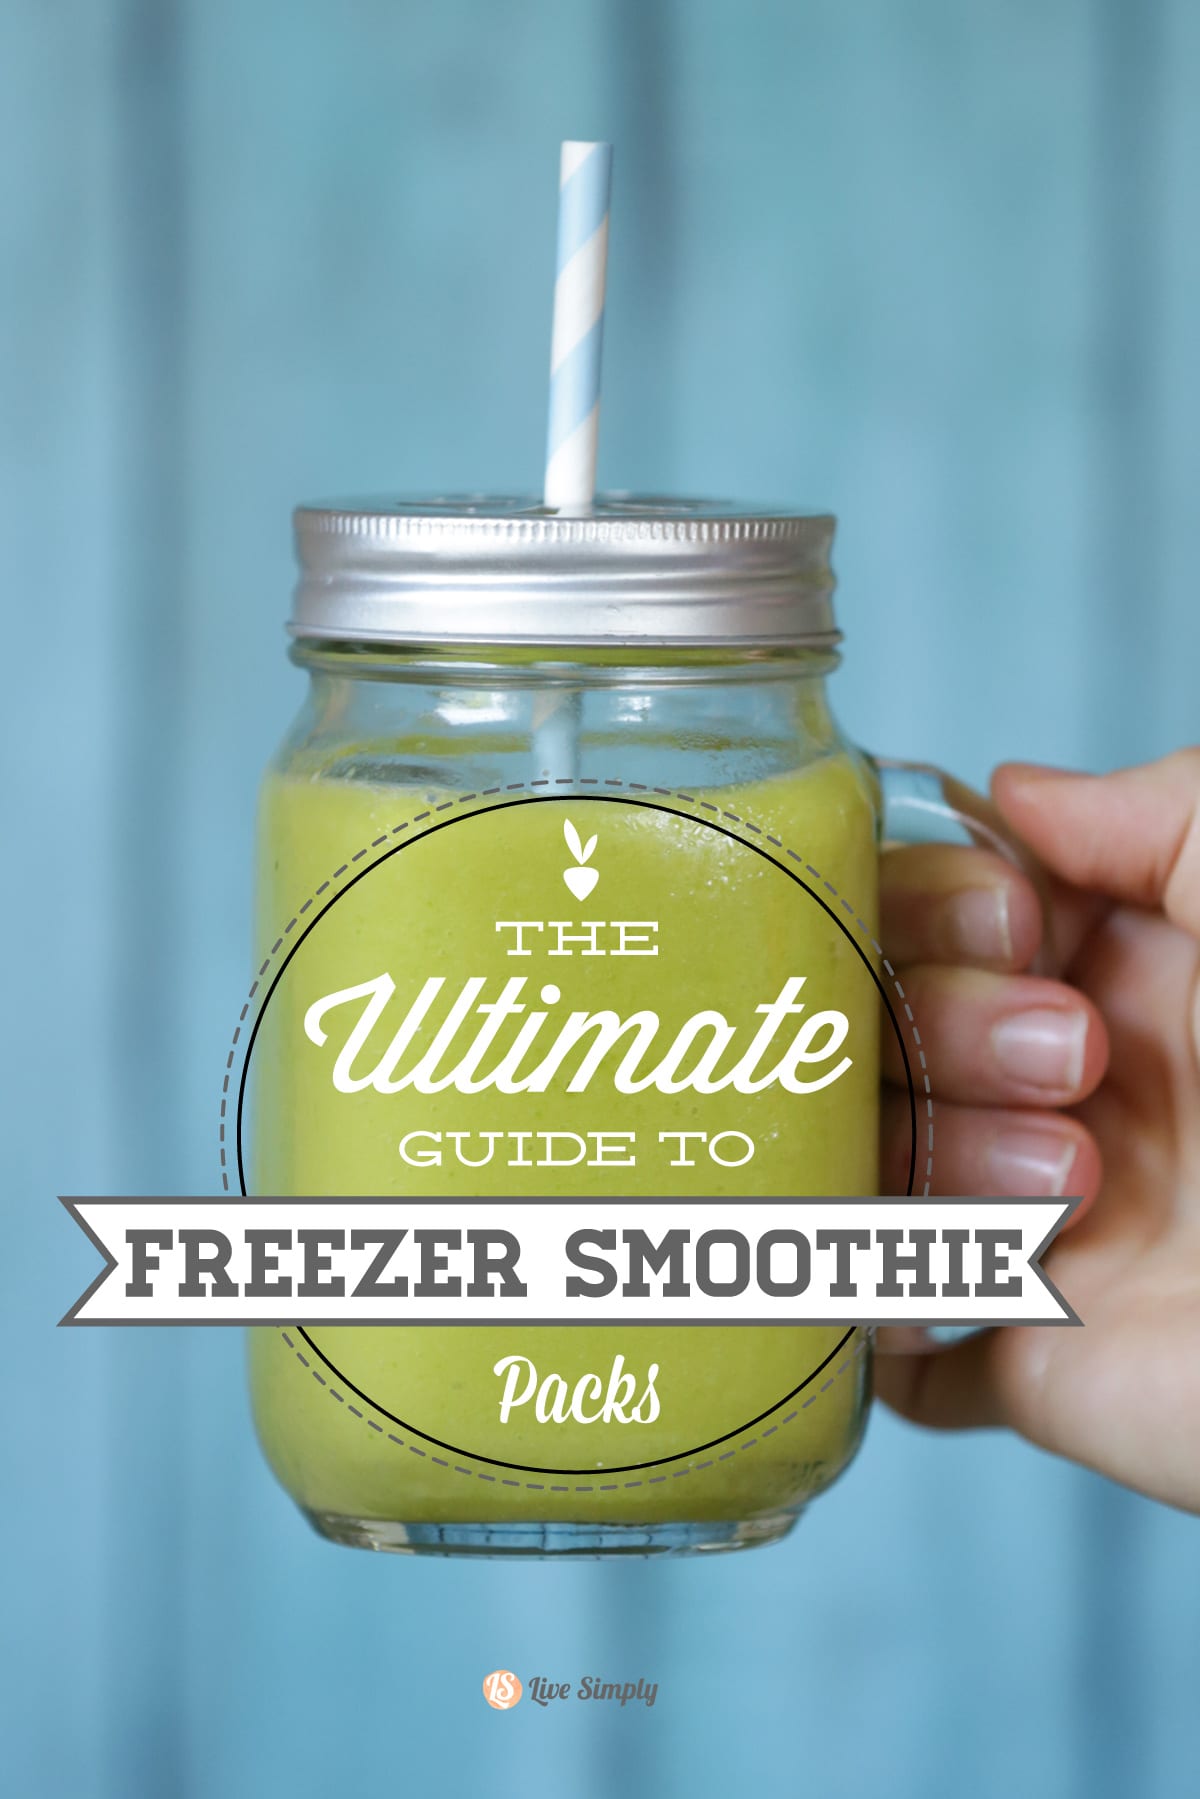 The Ultimate Guide to Freezer Smoothie Packs + Video Tutorial